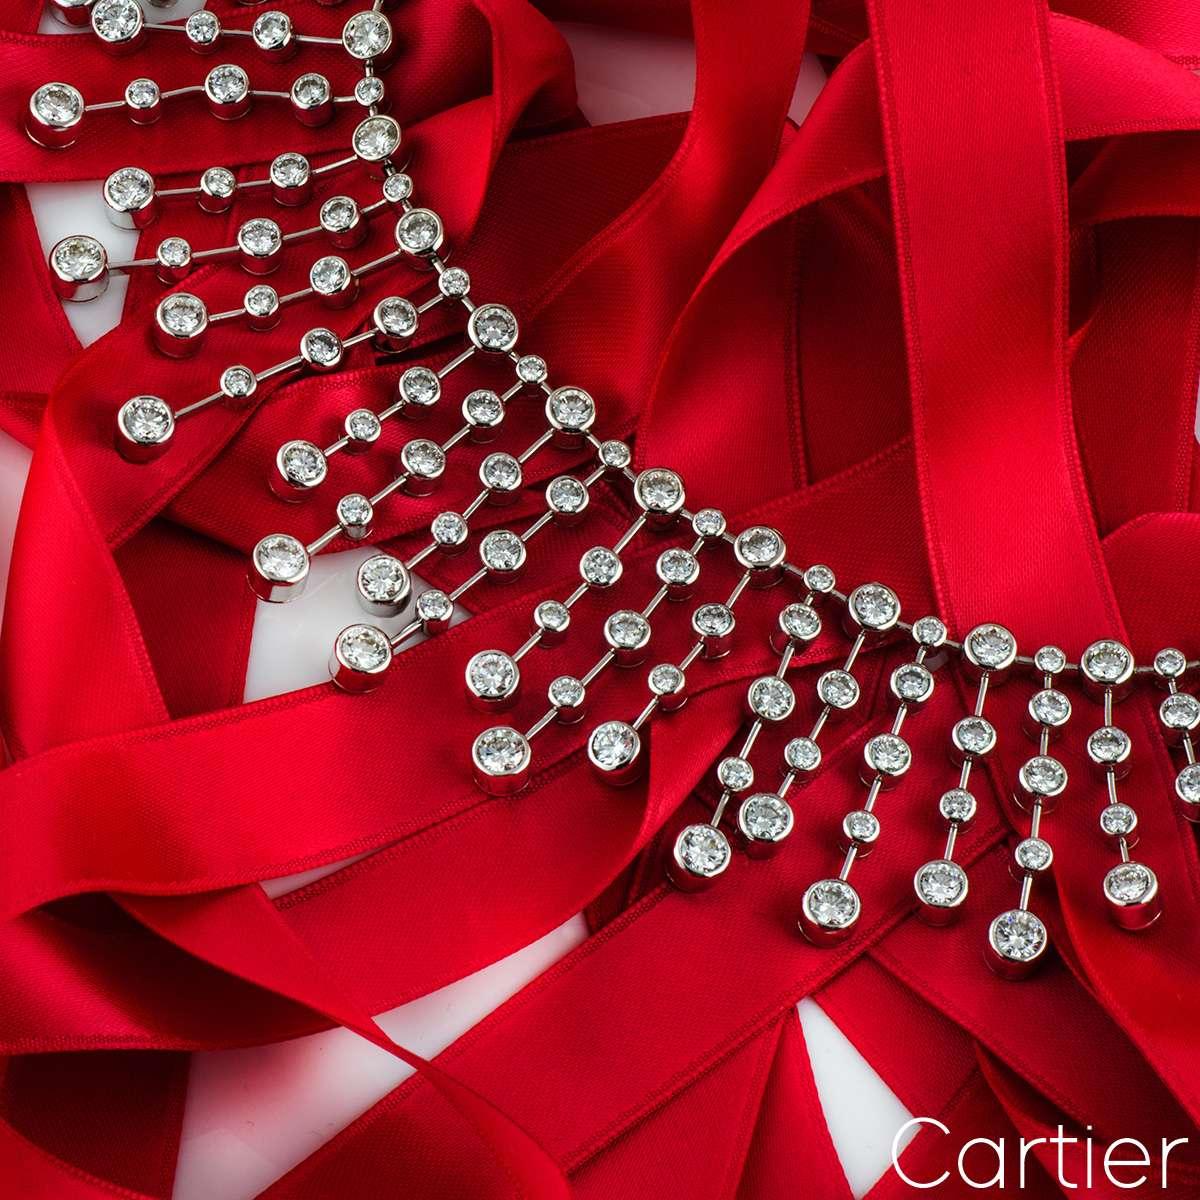 A luxurious platinum Cartier diamond necklace. The necklace comprises of a choker style with 68 platinum collet strands with 306 round brilliant cut diamonds each set in a rubover setting. The strands alternate in length along with the placement of